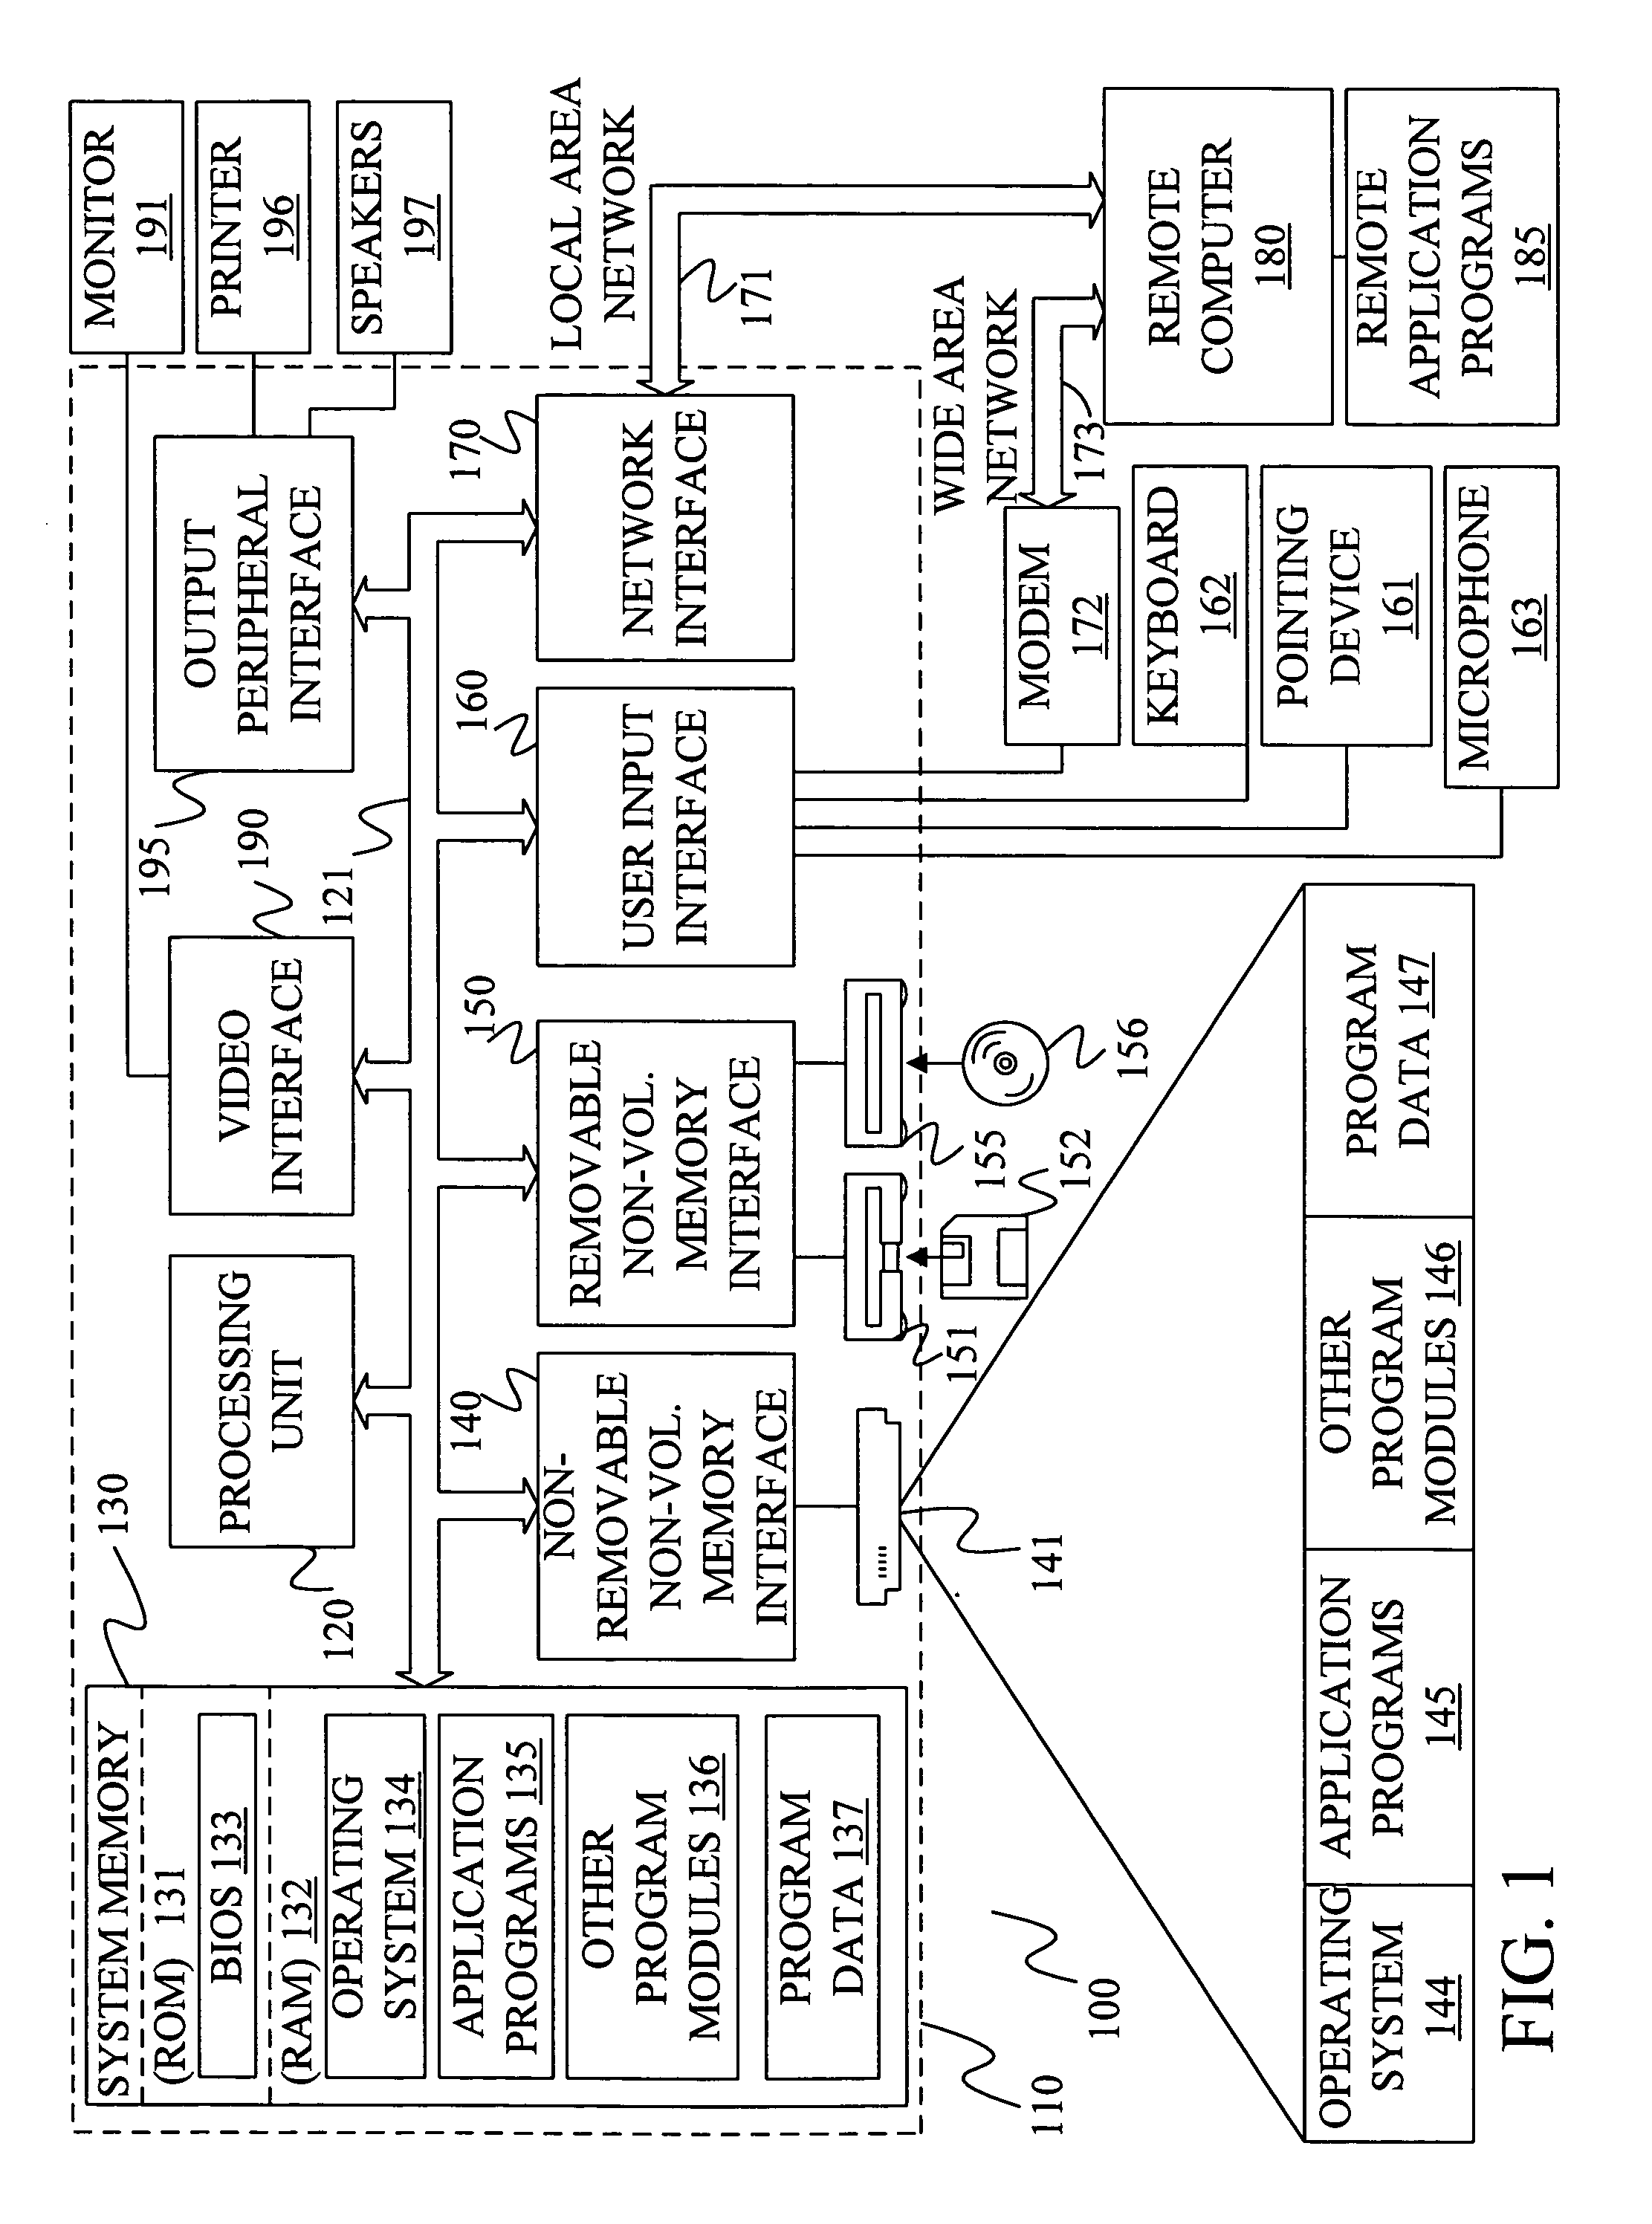 Method and apparatus for transducer-based text normalization and inverse text normalization